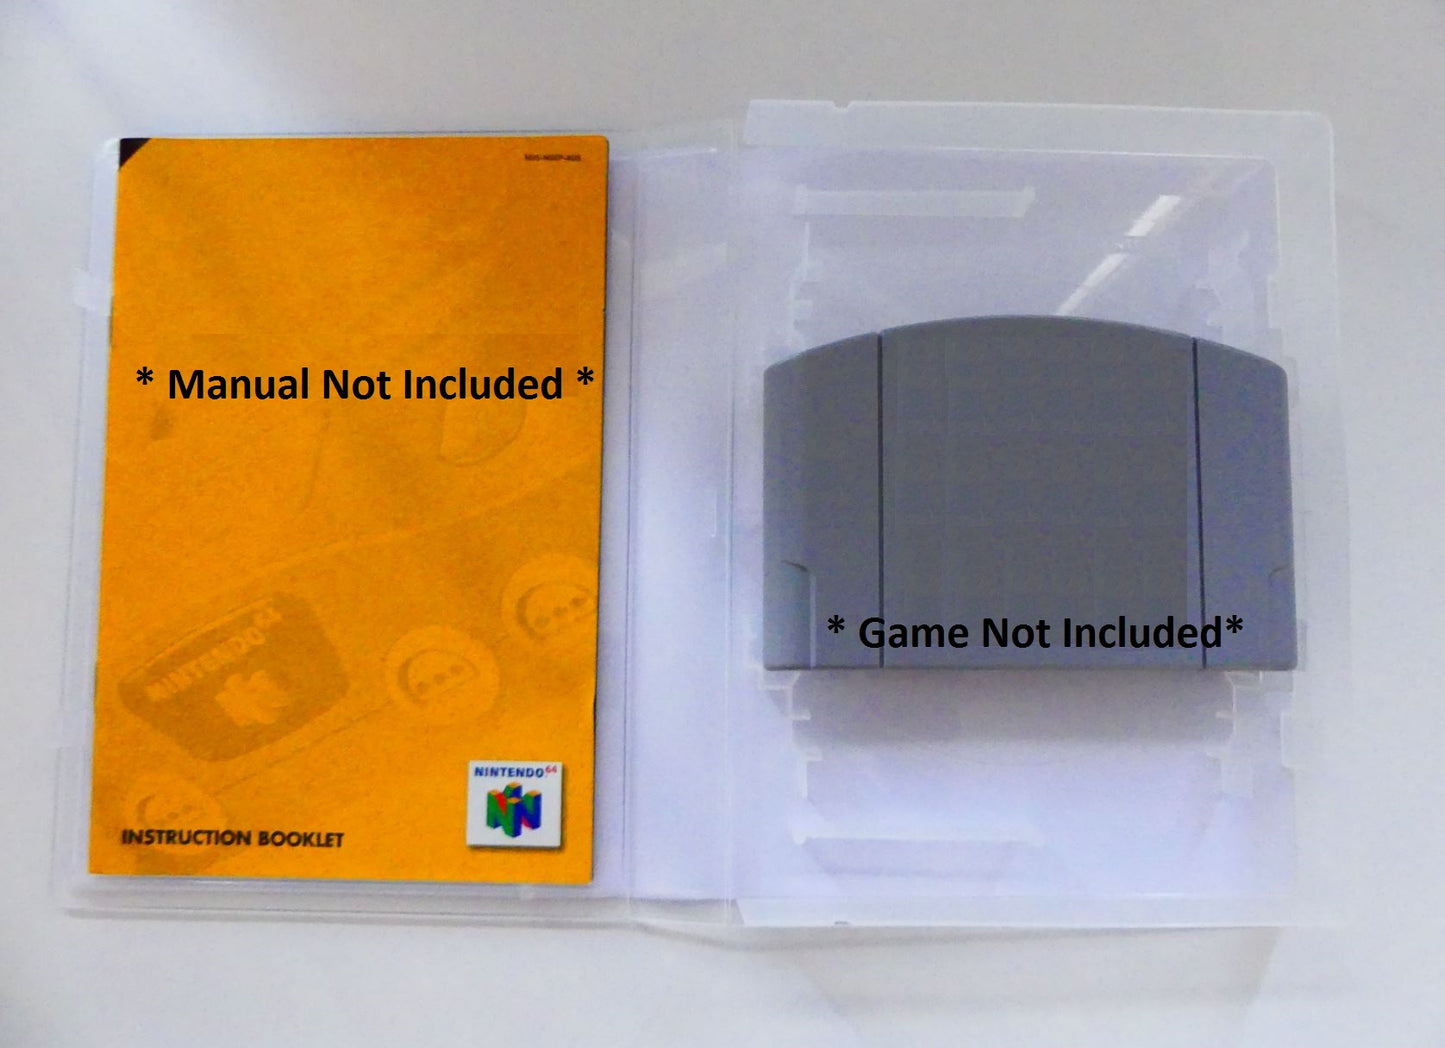 Command & Conquer - N64 Replacement Case